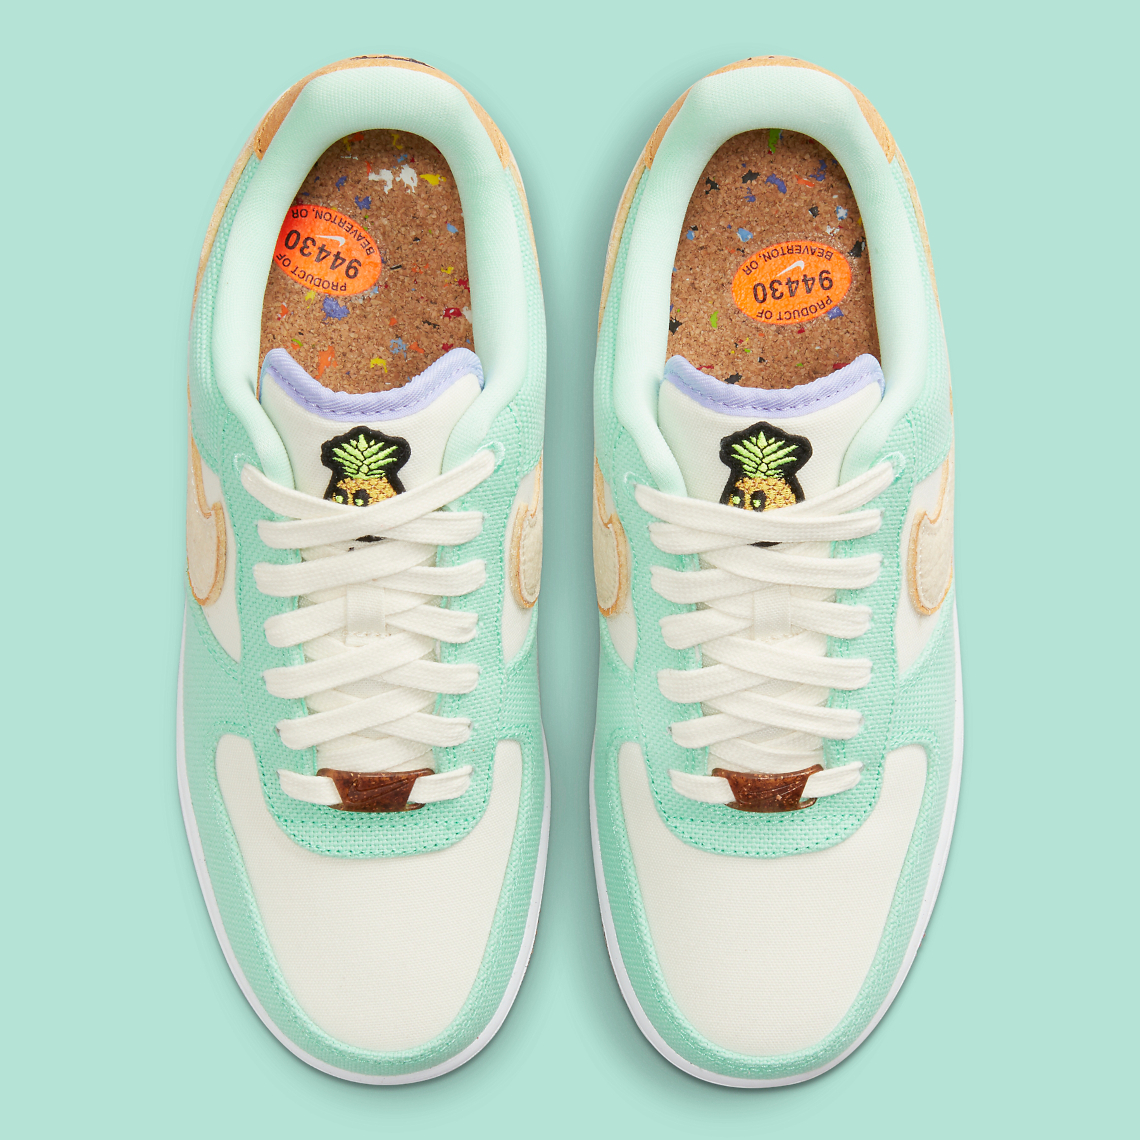  Nike Women's Air Force 1 Low '07 Limited Edition Pineapple,  Green Glow/Coconut Milk/Metall, 6.5